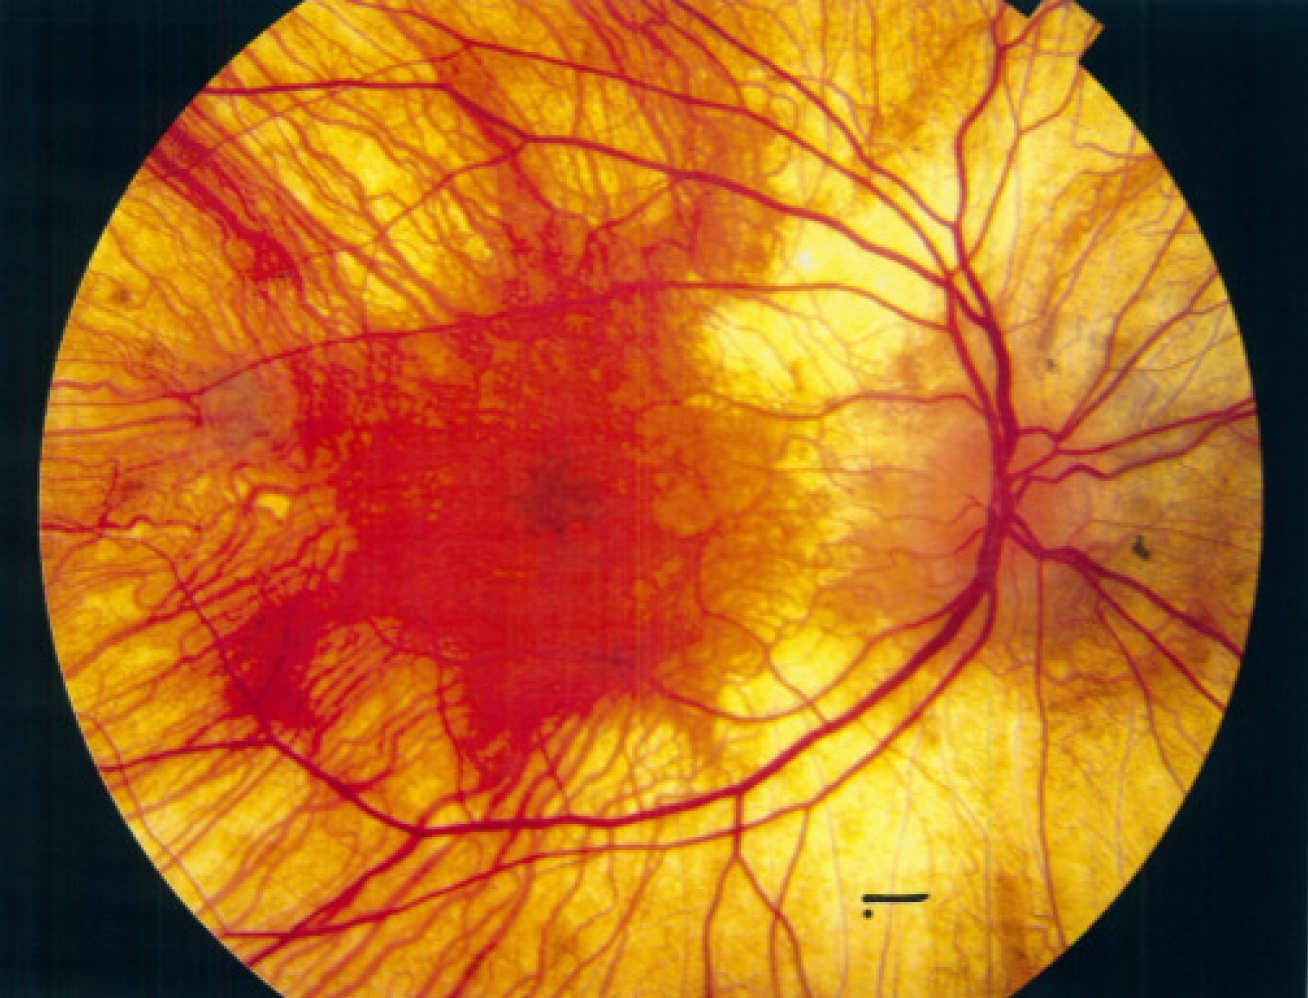 Scan of an eye with cloudy patches